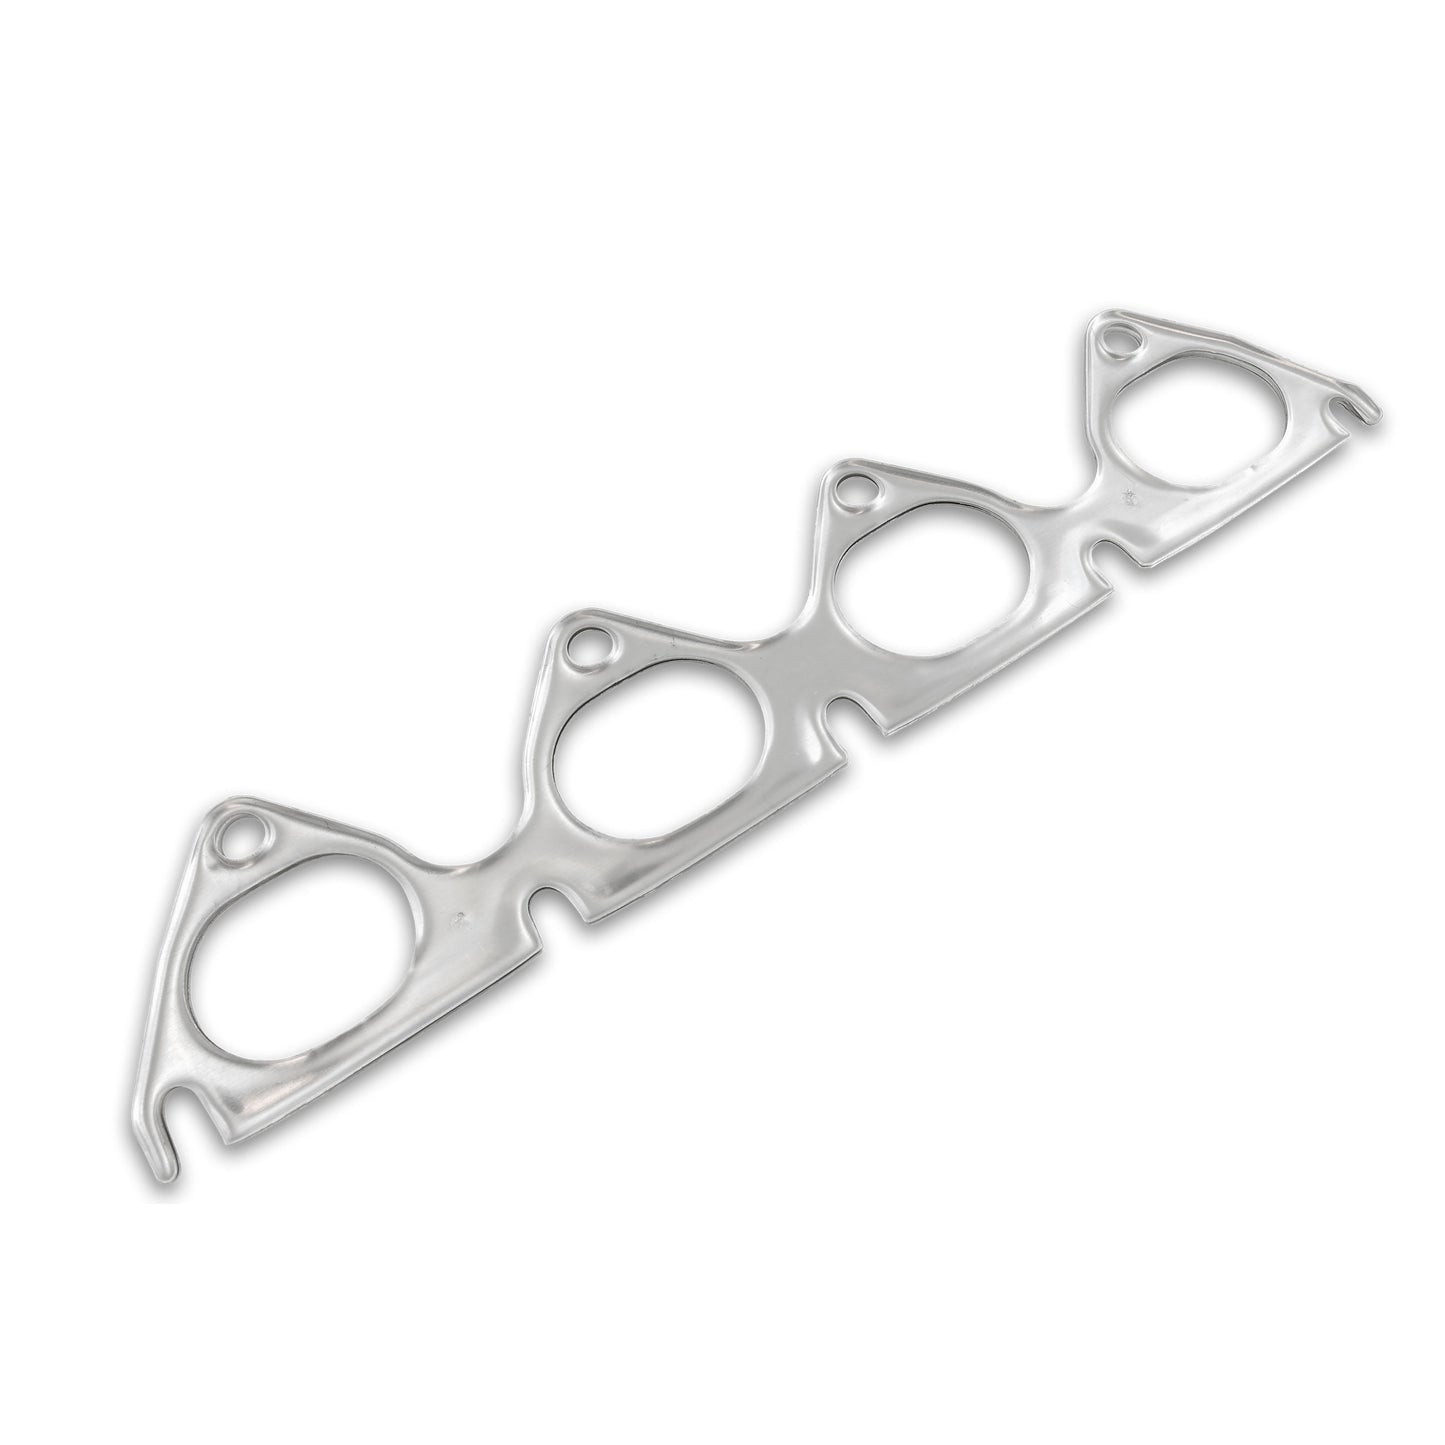 Patriot Exhaust 66016 Seal-4-Good Gaskets Acura 1678-1797-1934 cc oval 1.5 in x 2in